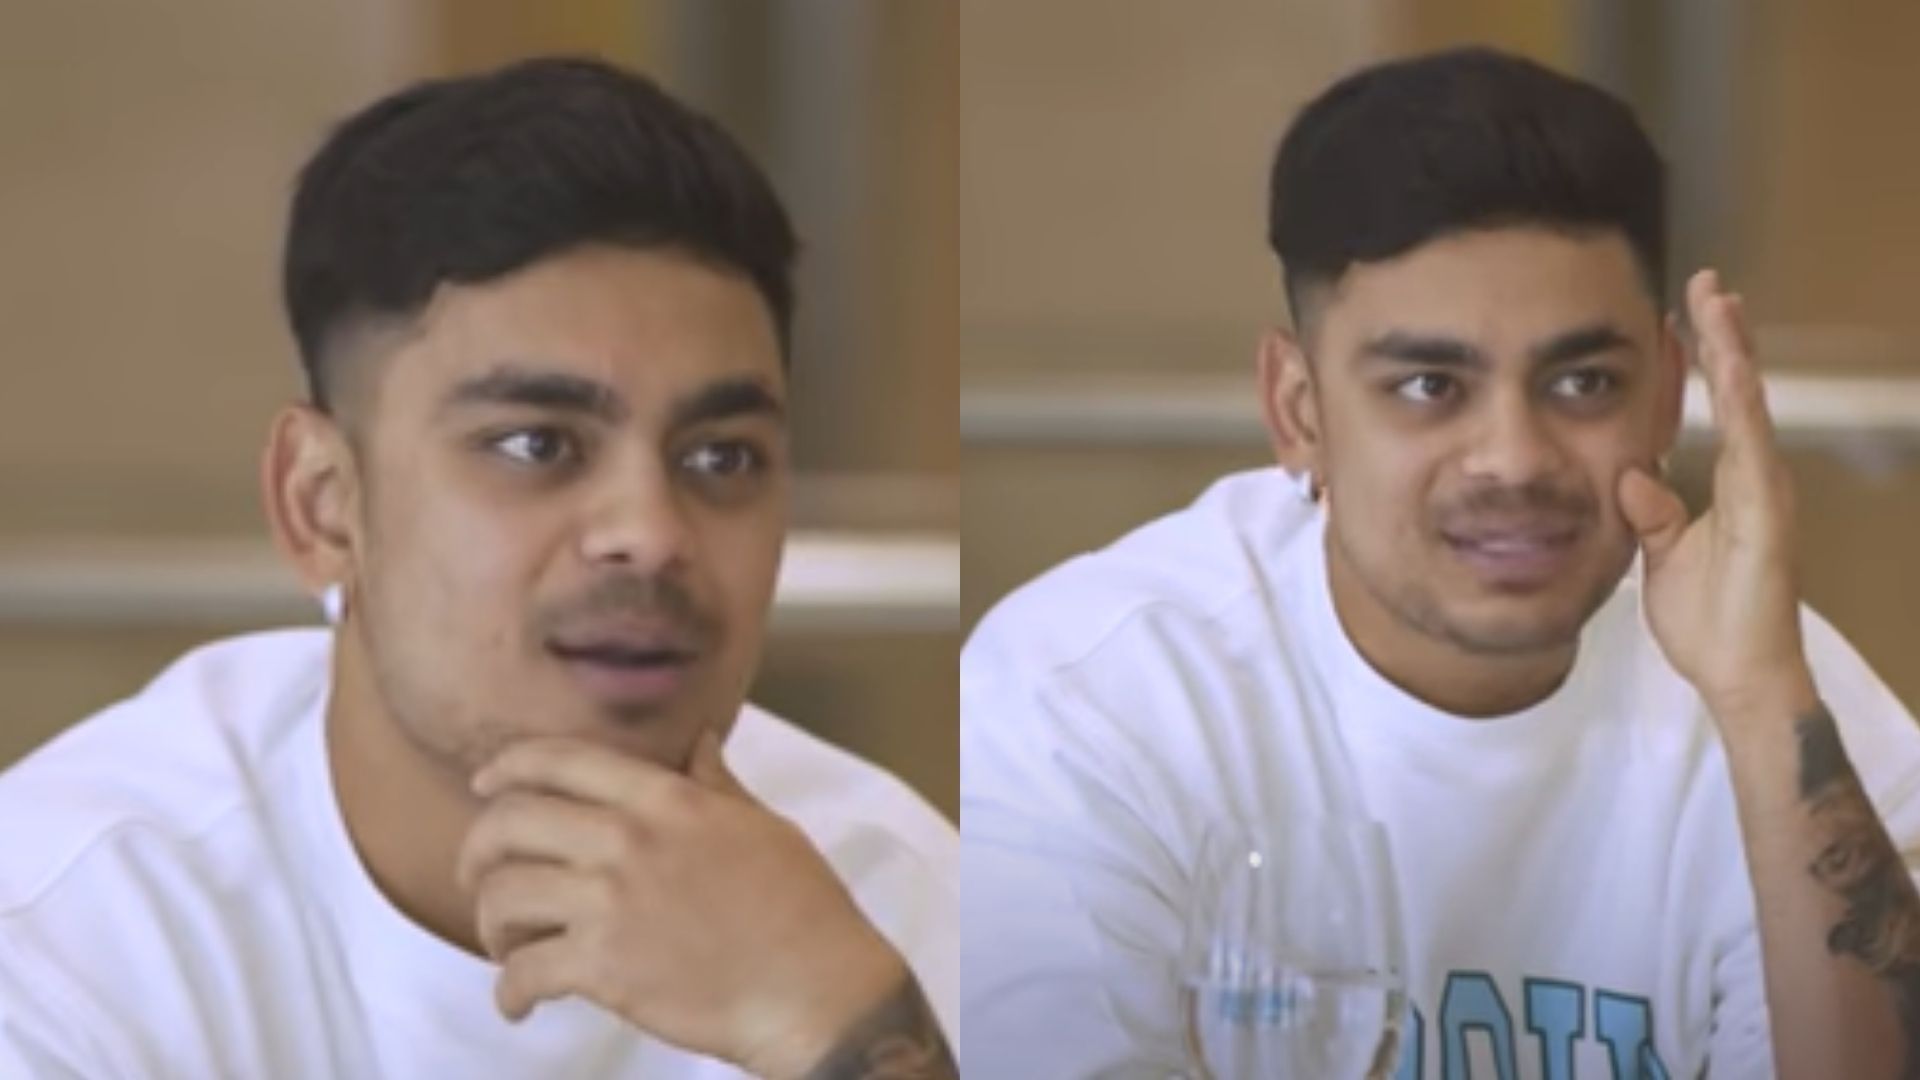 Ishan Kishan spoke about how he used to depend on fast food during his early days. (P.C.: BwC YouTube)